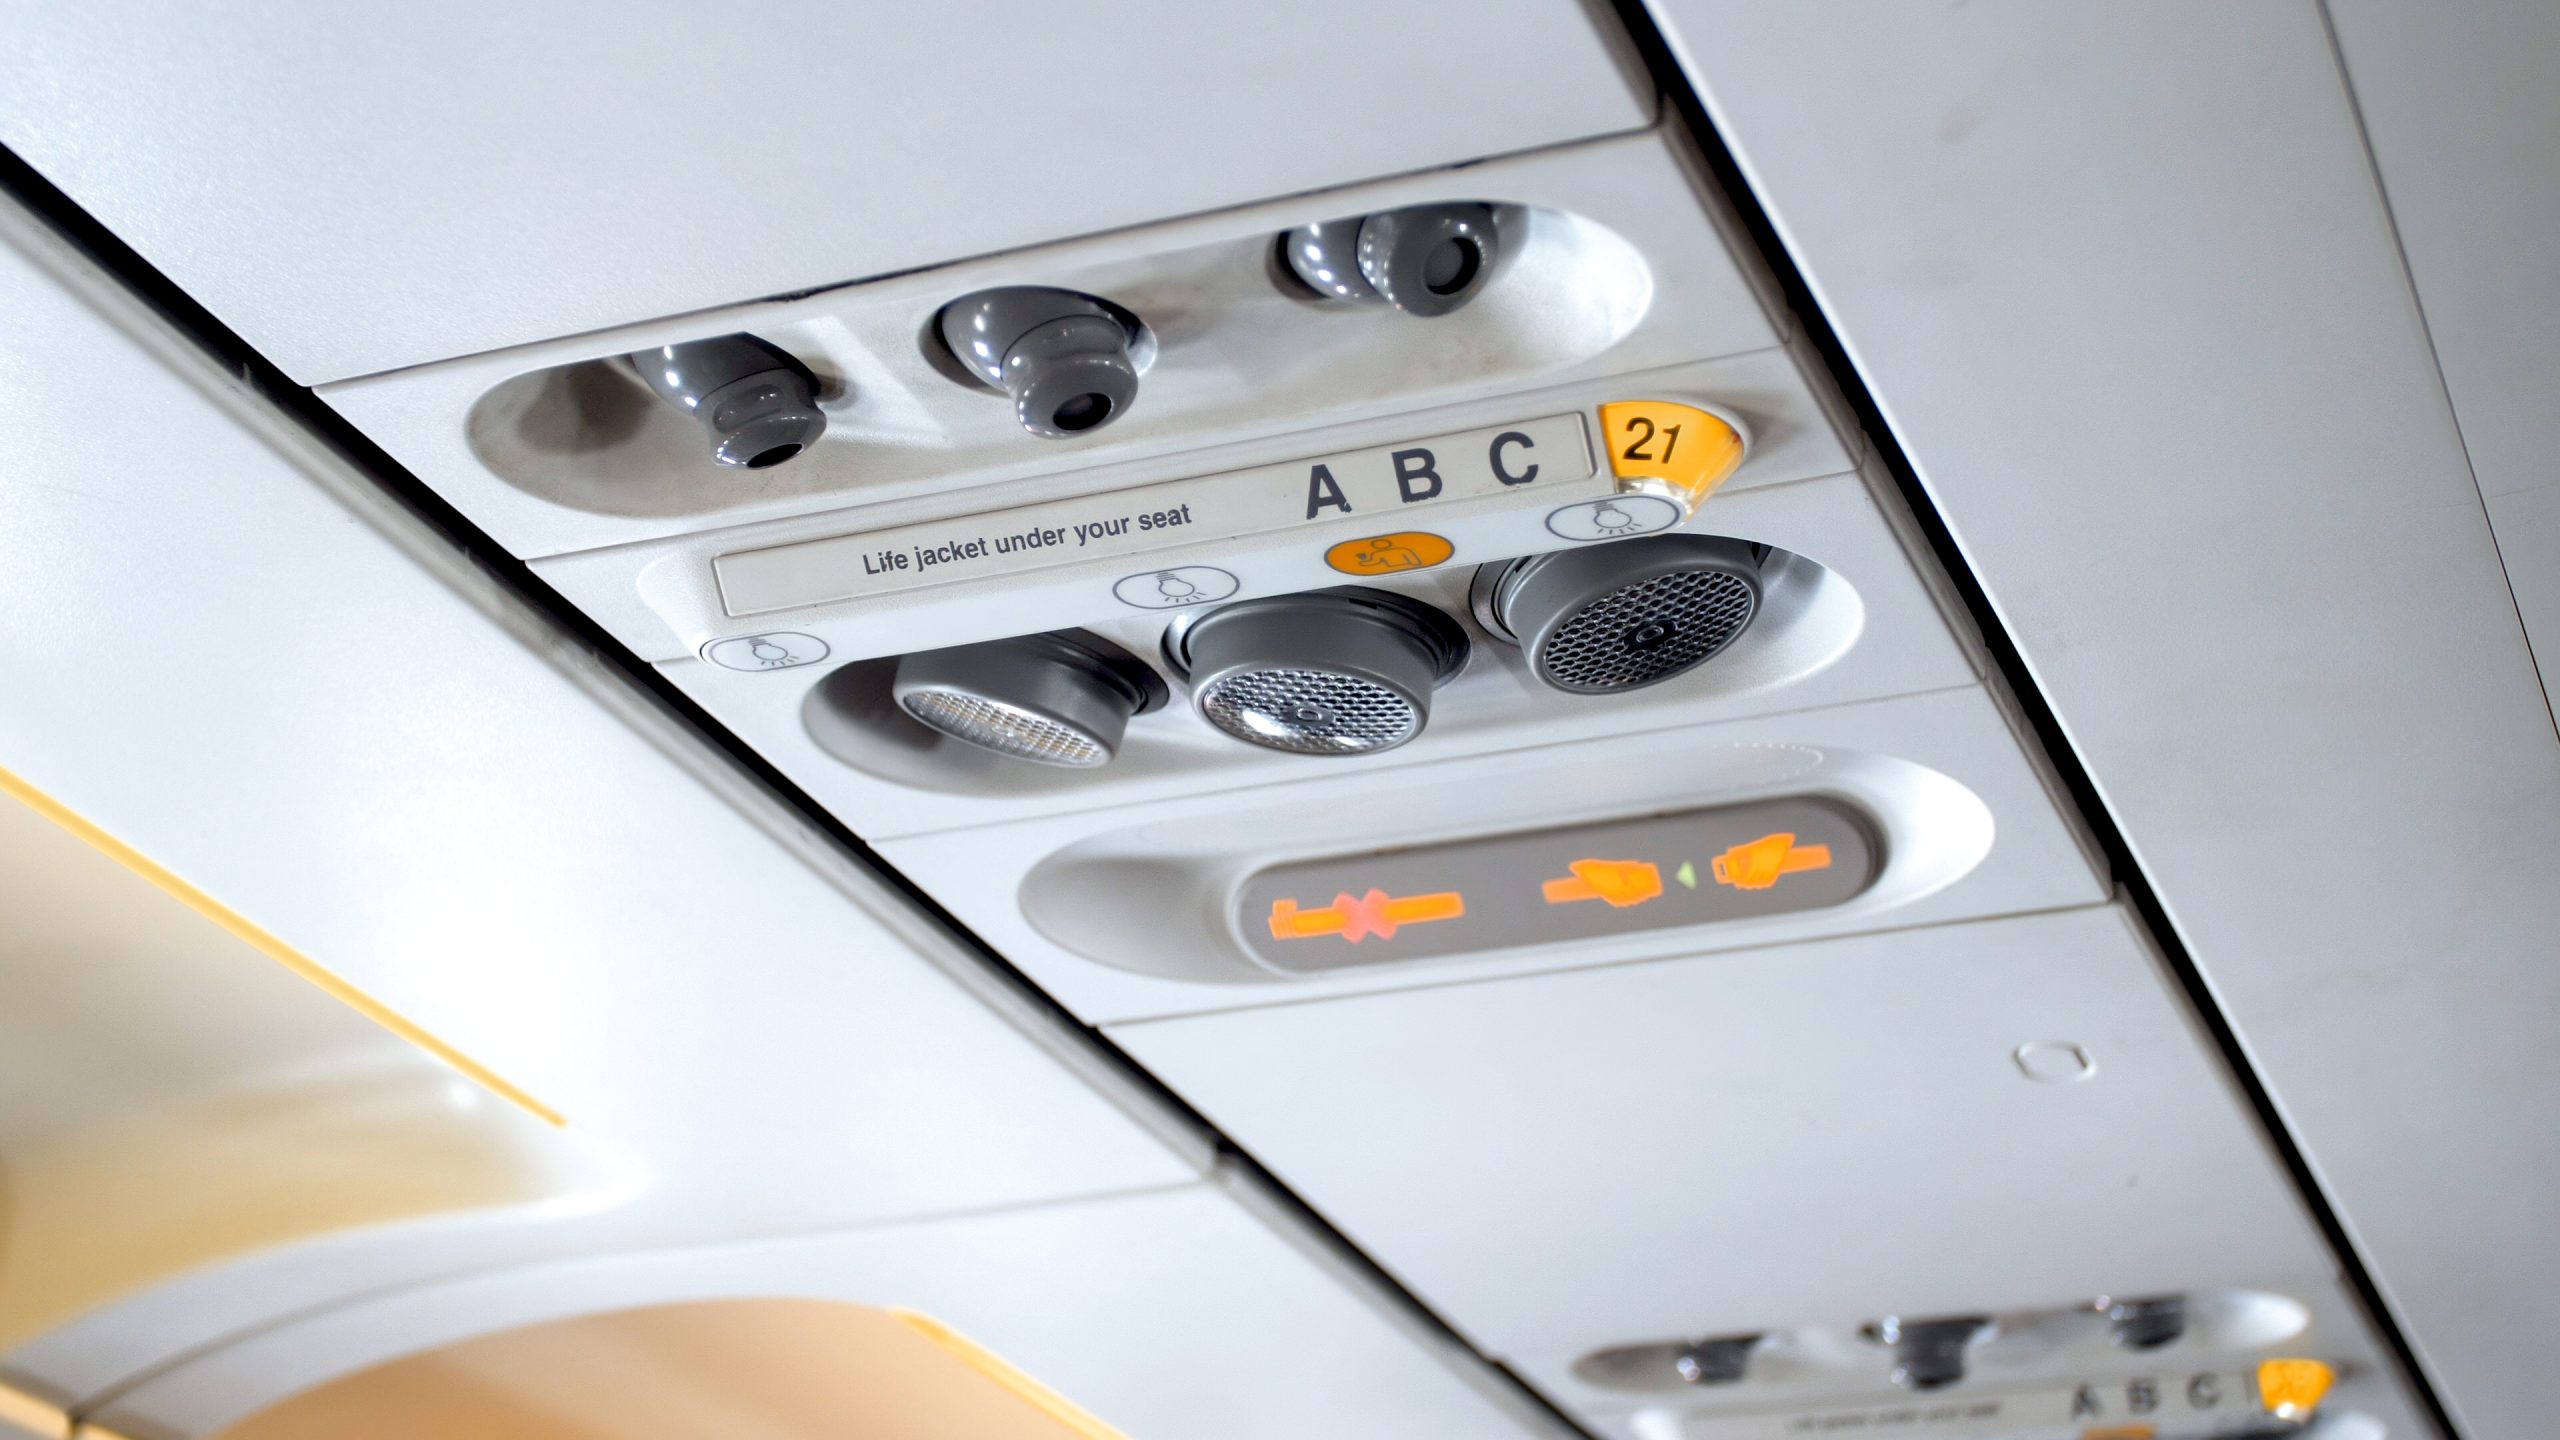 Closeup image of buttons and lights on the ceiling above the pasenger seat in airplane